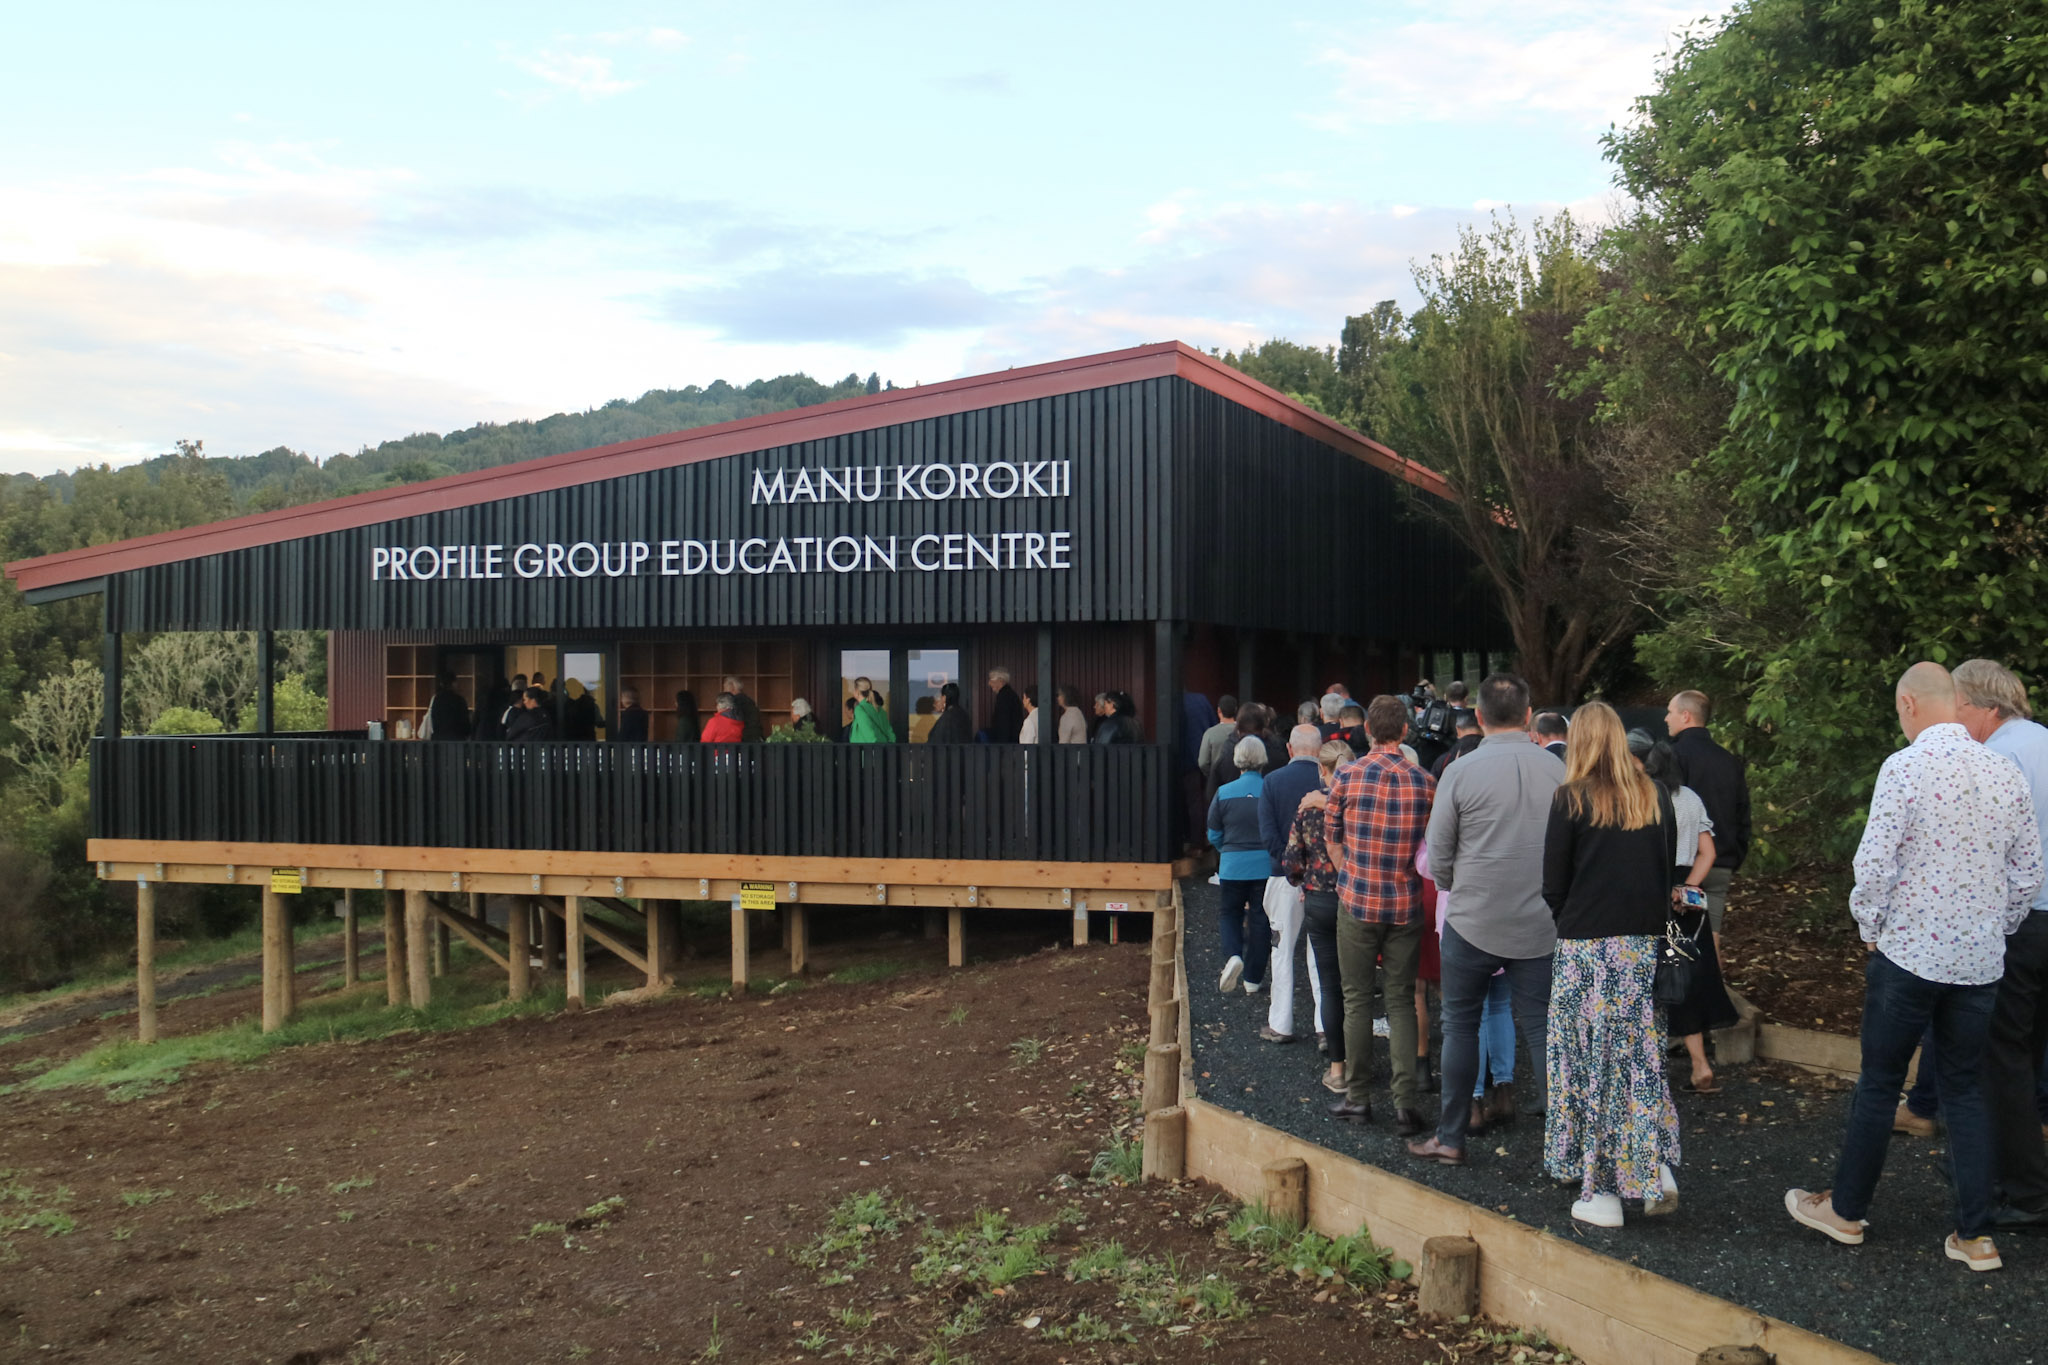 Group of people walking to enter the Manu Korokii Profile Group Education Centre for the first time.